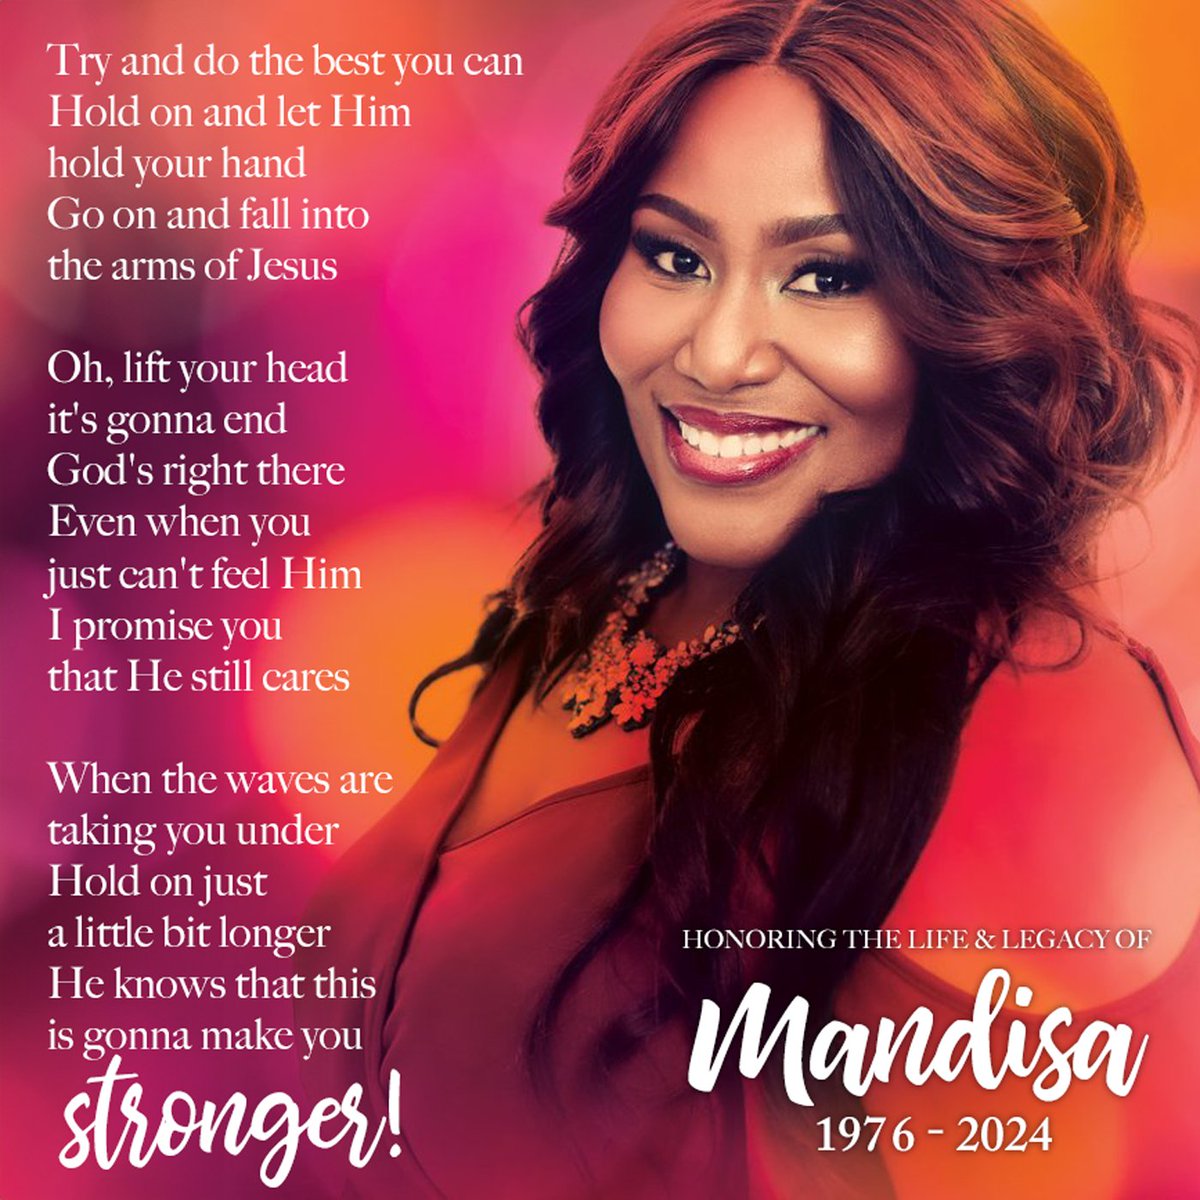 Our hearts broke in learning of the passing of Mandisa. 💔 We're holding on to her lyrics 'The pain ain't gonna last forever... things can only get better... believe me... this is gonna make you stronger.' Join KLTY all weekend as we celebrate her life through her music. 🙏 🎶